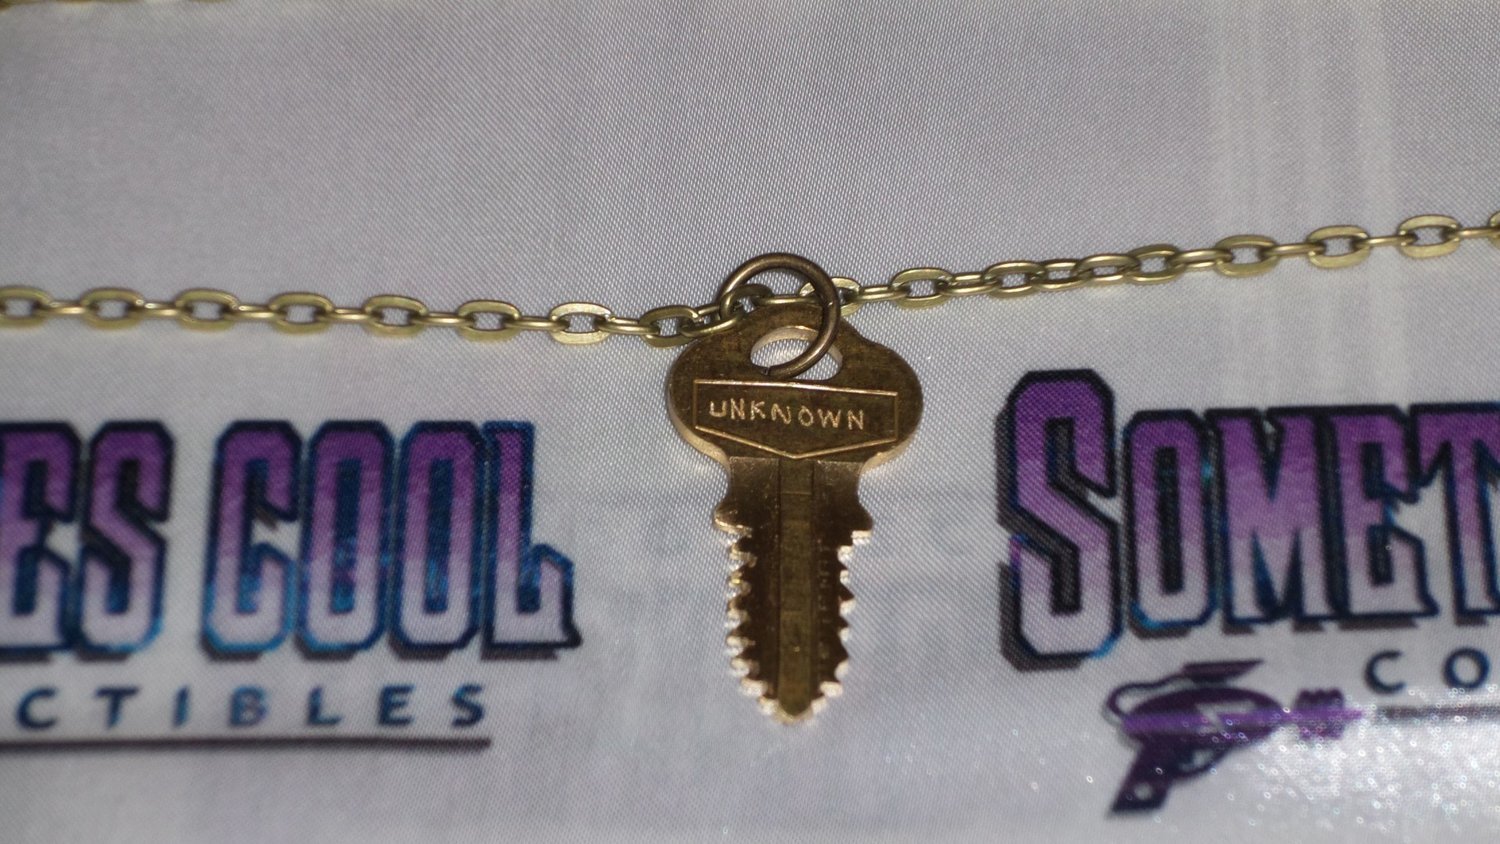 The Key to the Unknown Necklace